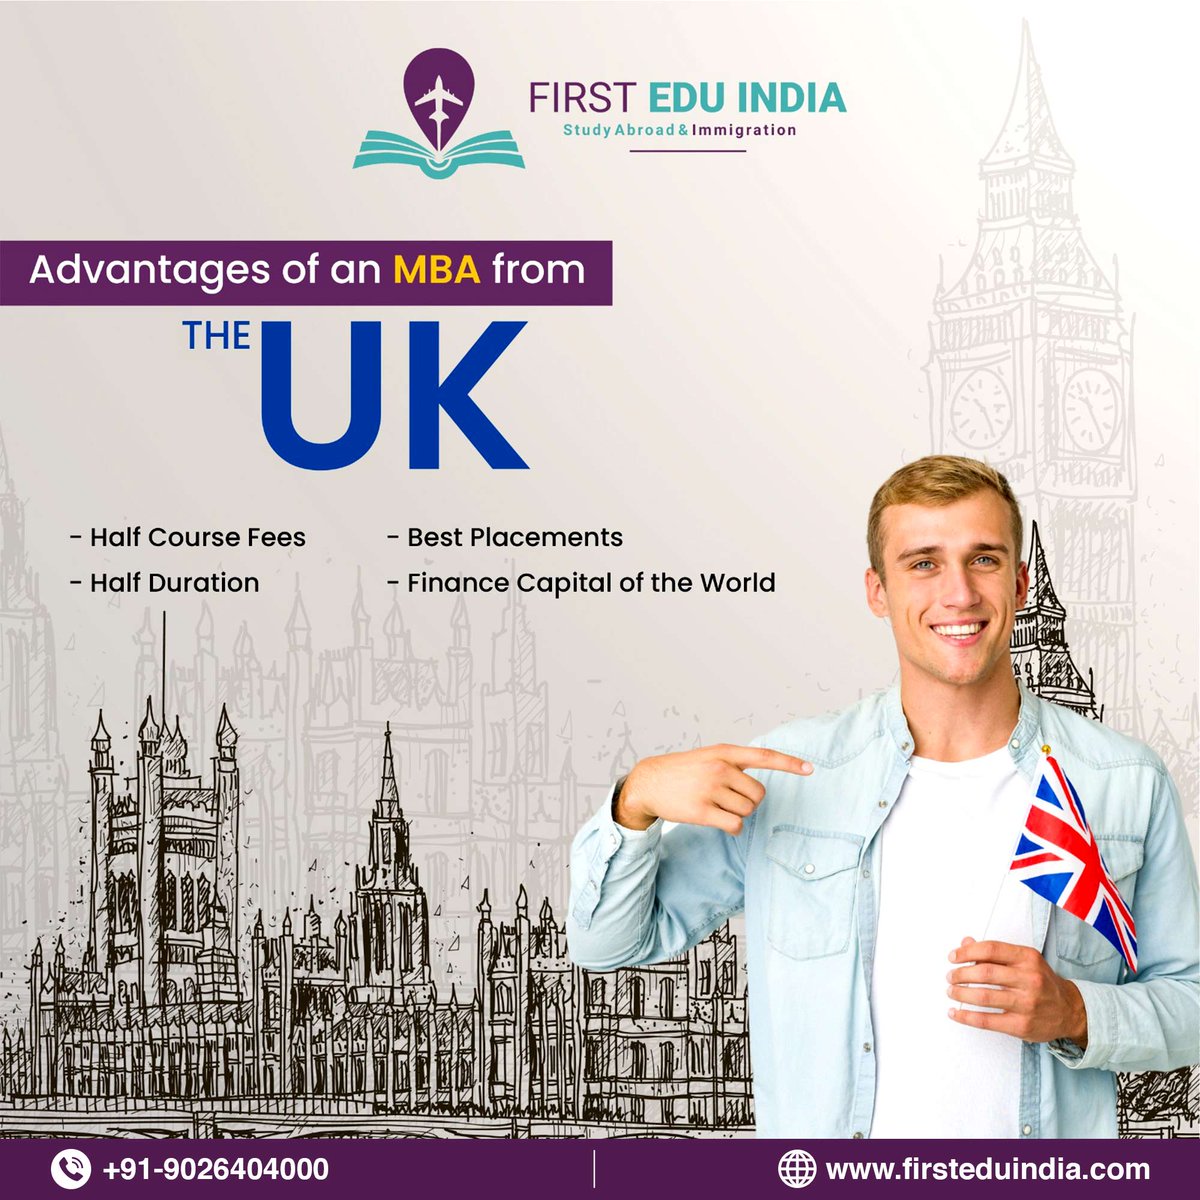 Transform your career with a UK MBA! 🌟🎓 First Edu India offers global reputation, networking opportunities, and career advancement. Let's make your MBA dreams come true! 💼🌍
.
.
.
 #FirstEduIndia #UKMBA  #DreamCollege #DreamUniversity #DreamEducation